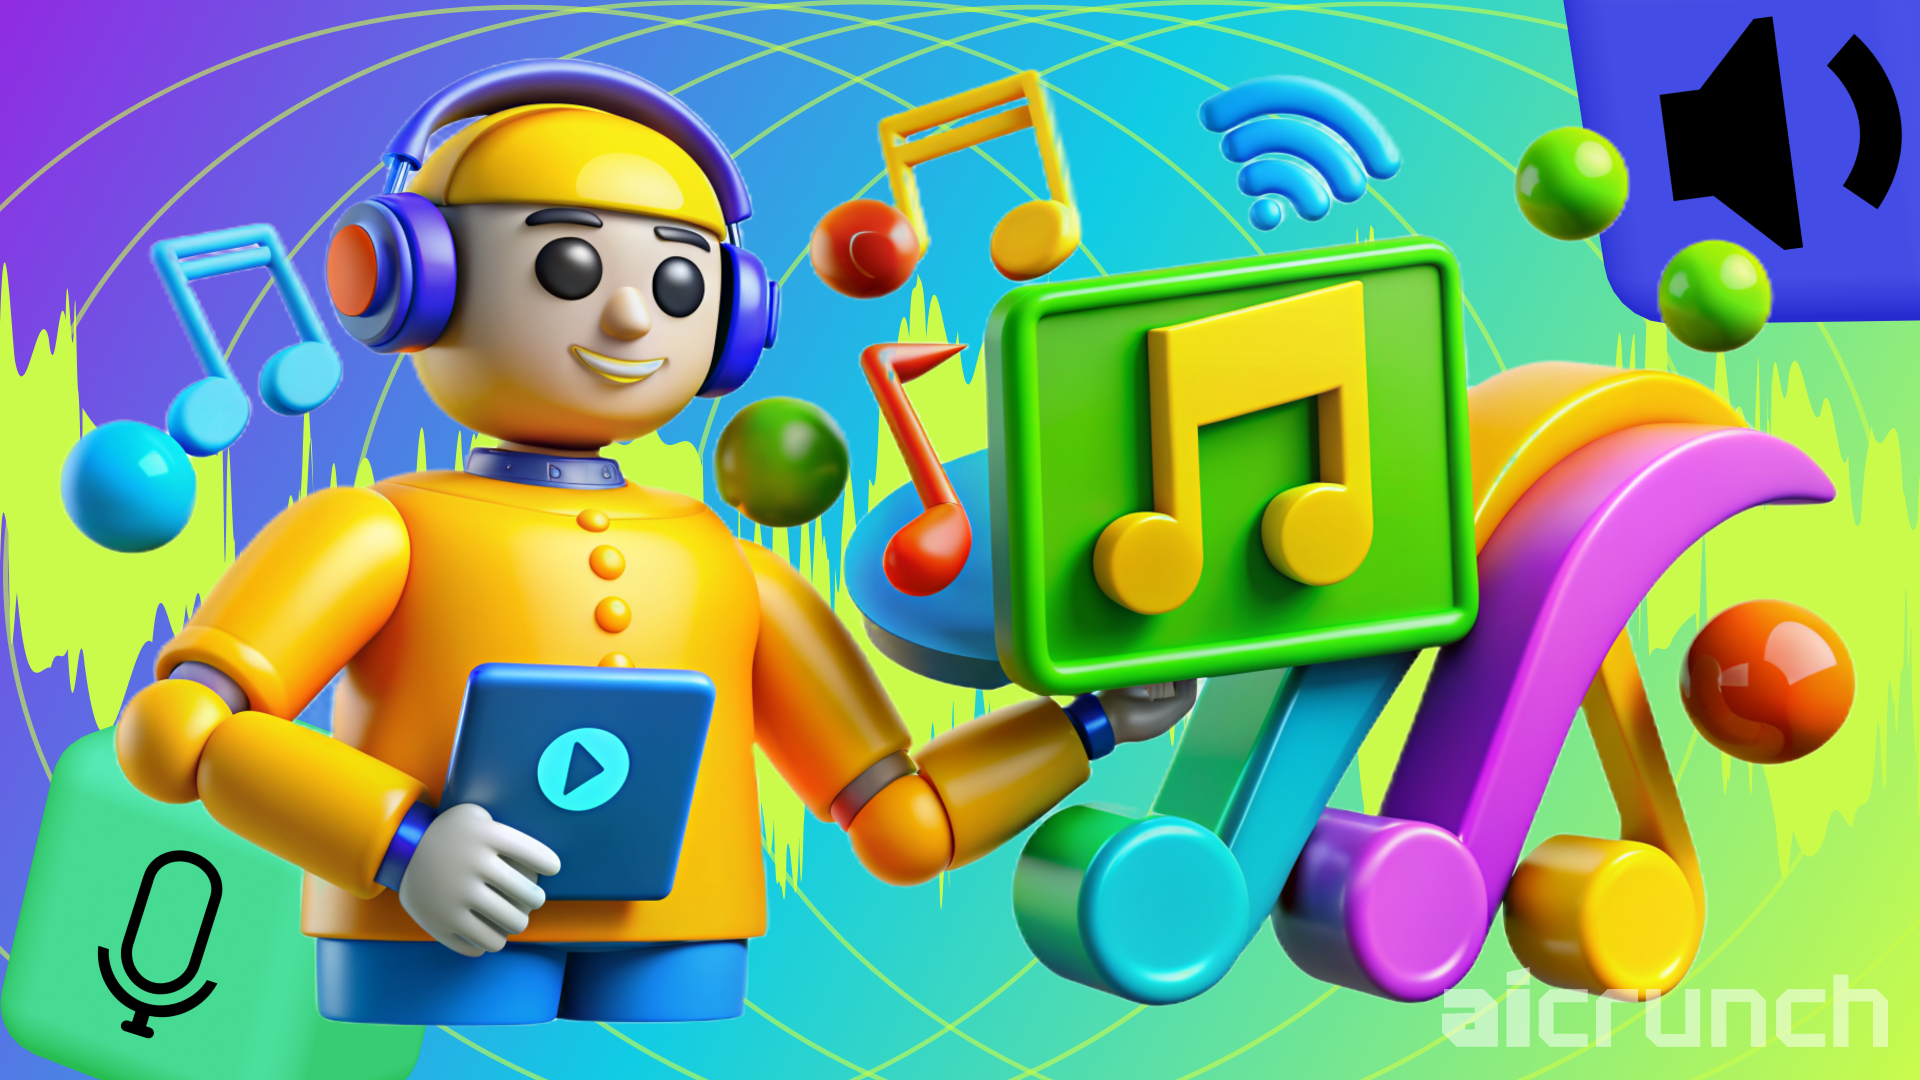 ai-music-extender-unveiled-delving-into-musical-wonders